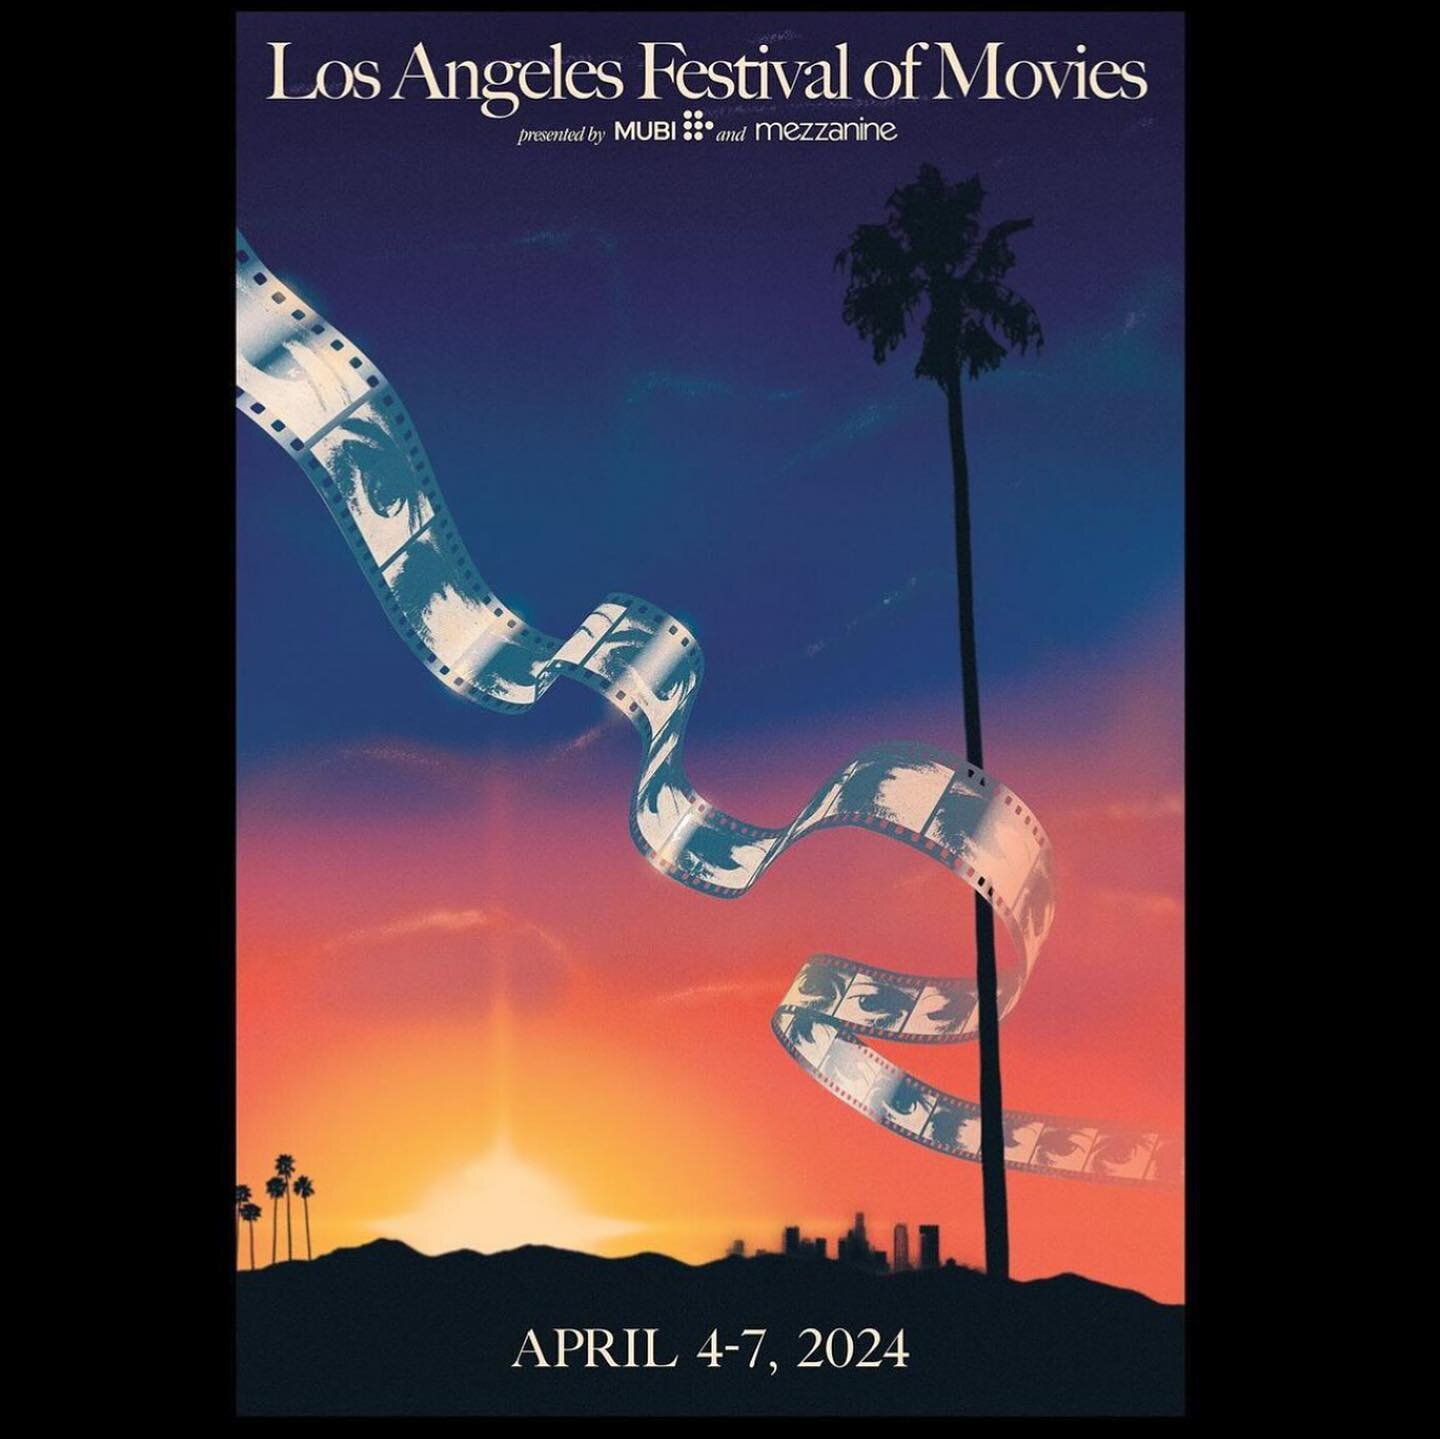 TOMORROW is opening night of the inaugural Los Angeles Festival of Movies, presented by MUBI and Mezzanine! Running tomorrow through Sunday, the festival will showcase a selection of narrative and documentary film premieres (including some restoratio